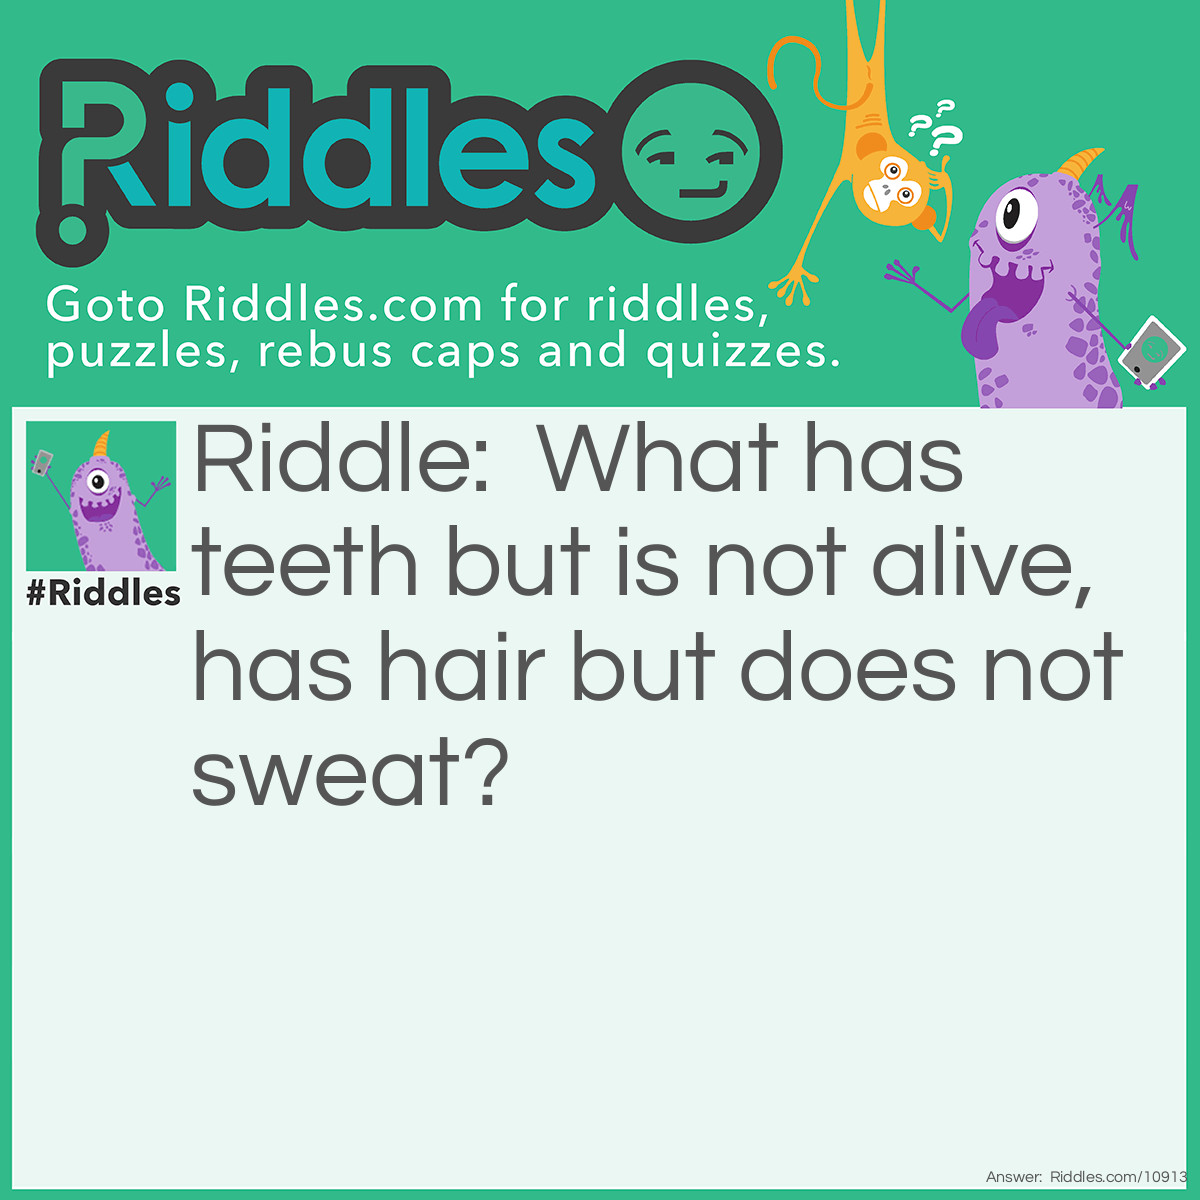 Riddle: What has teeth but is not alive, has hair but does not sweat? Answer: Corn.